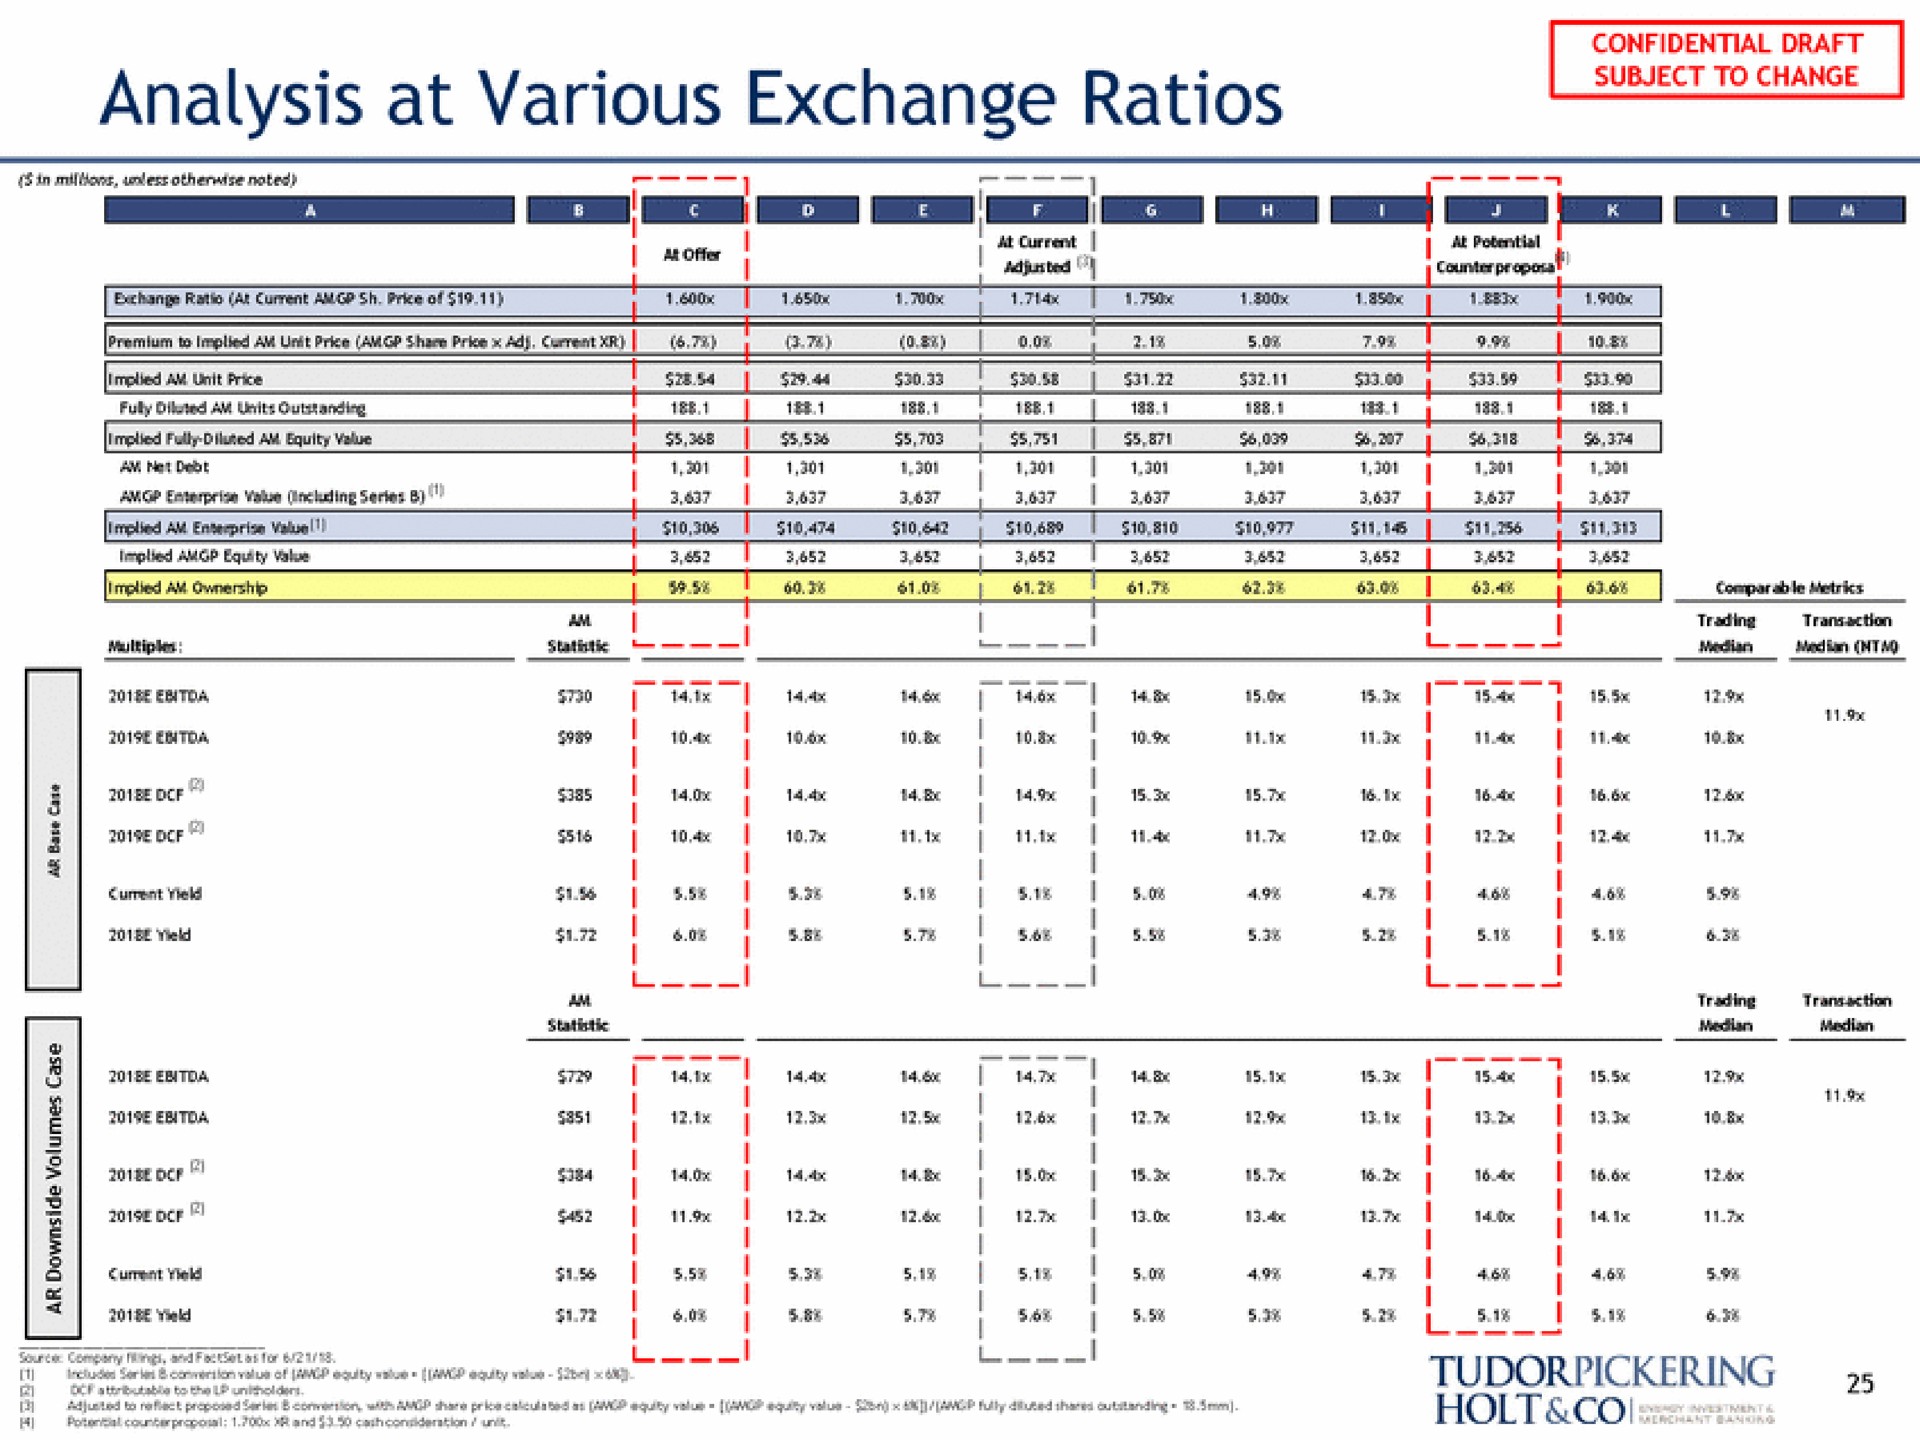 analysis at various exchange ratios | Tudor, Pickering, Holt & Co